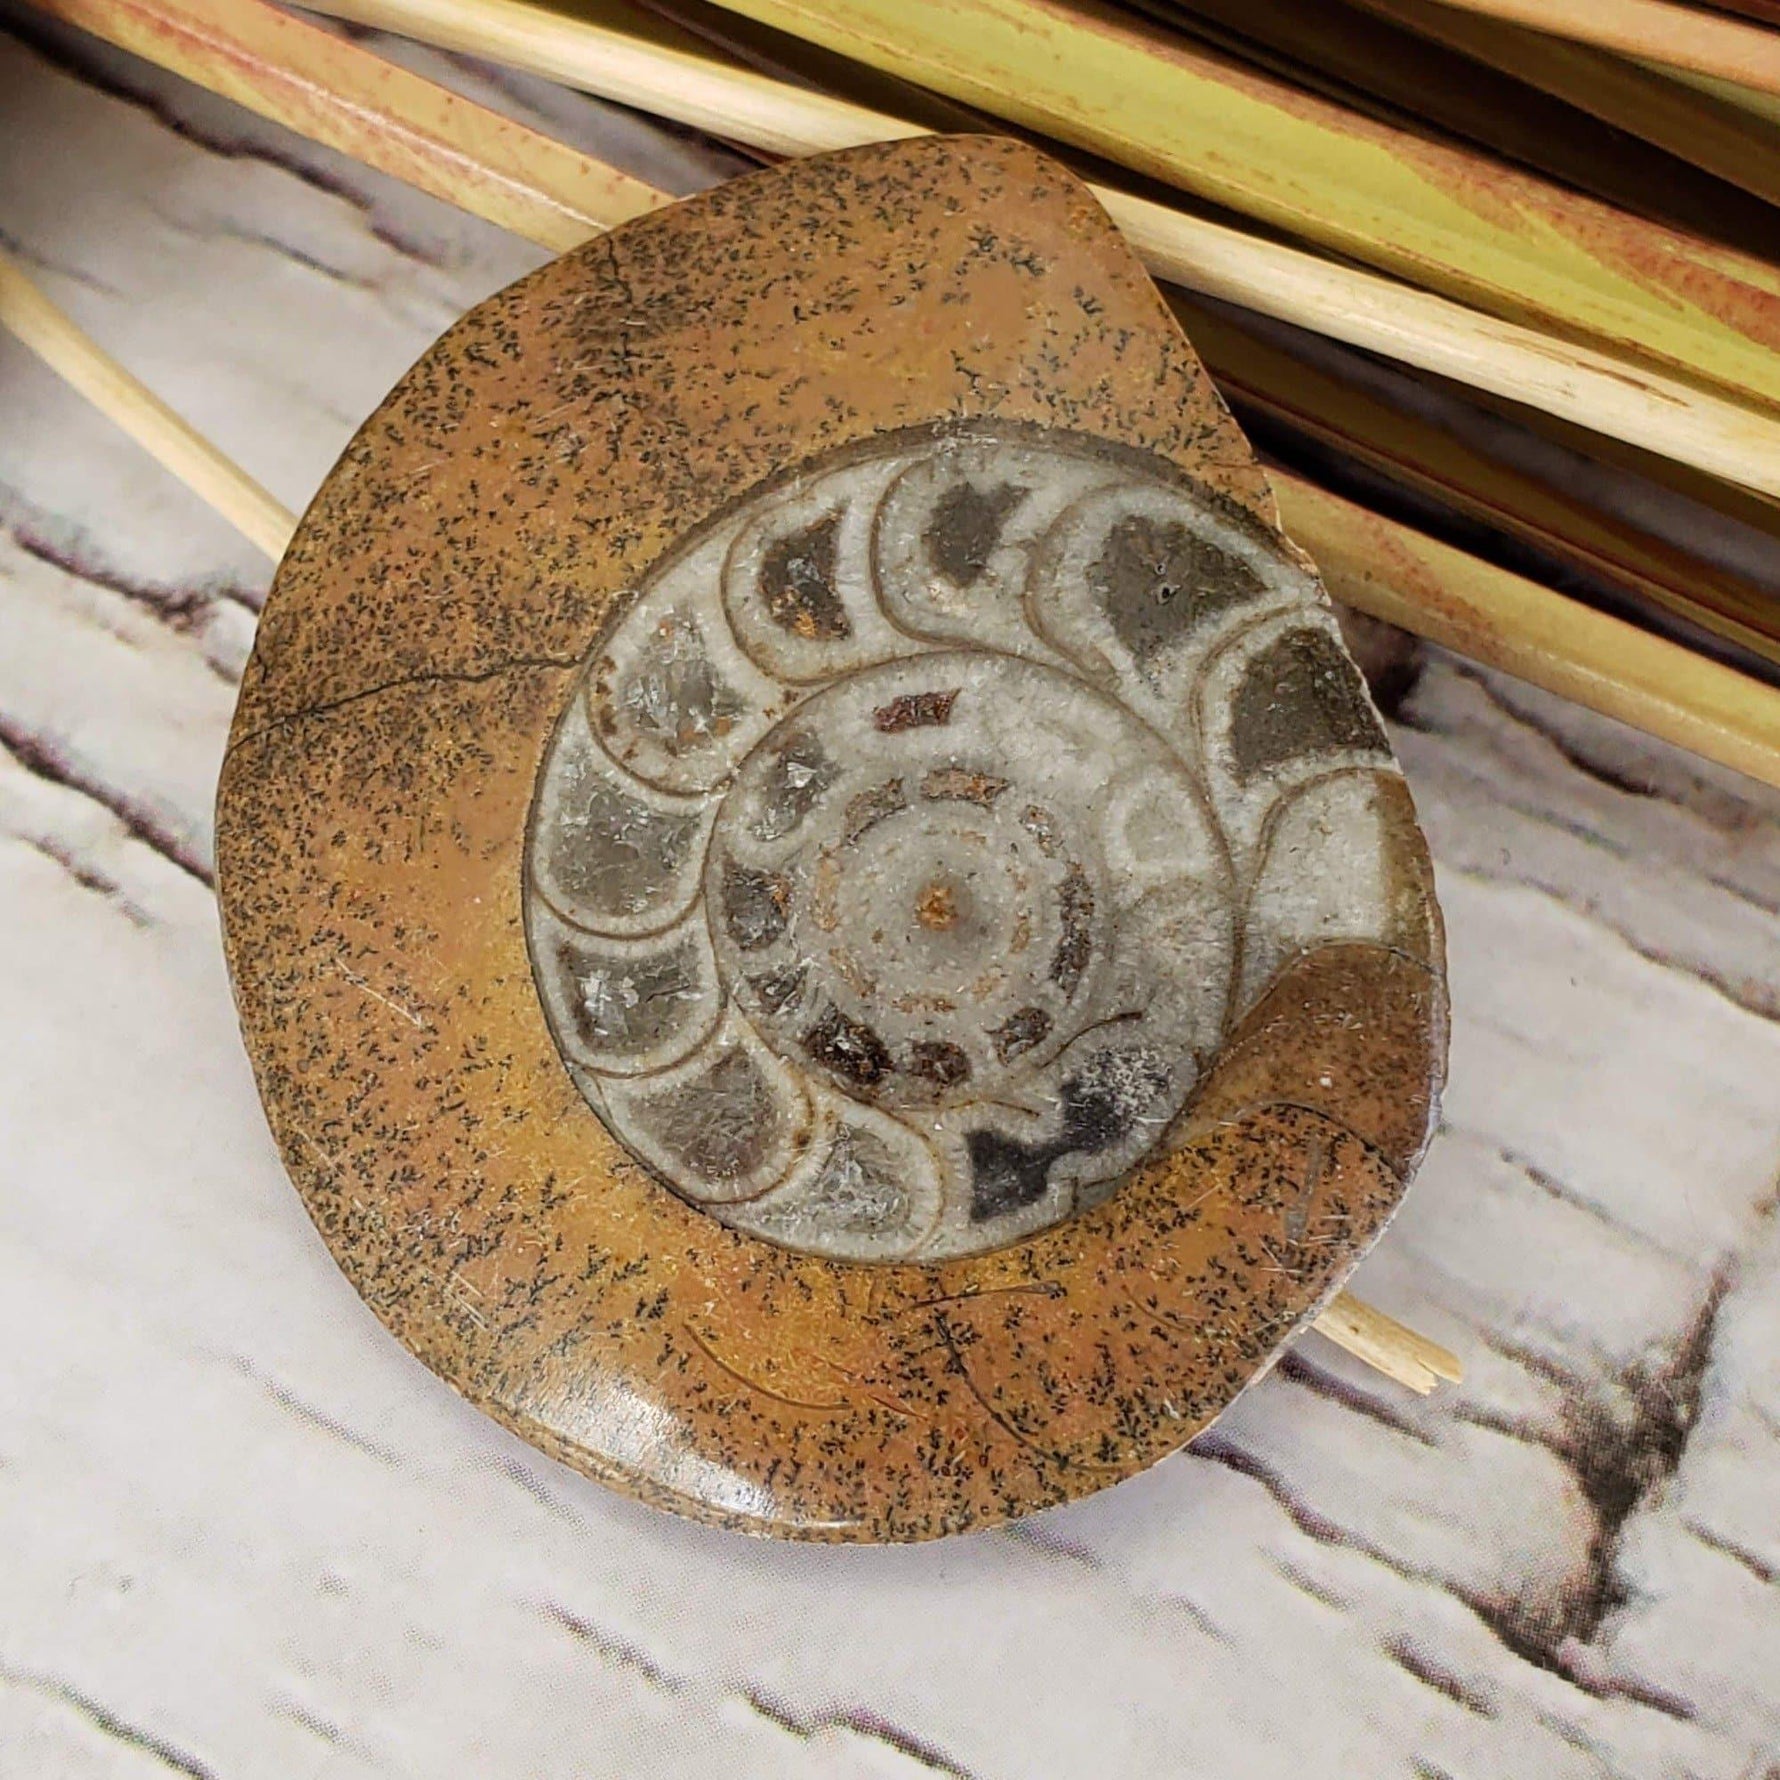 Fossilized Ammonite Cabochon in Polished Marble